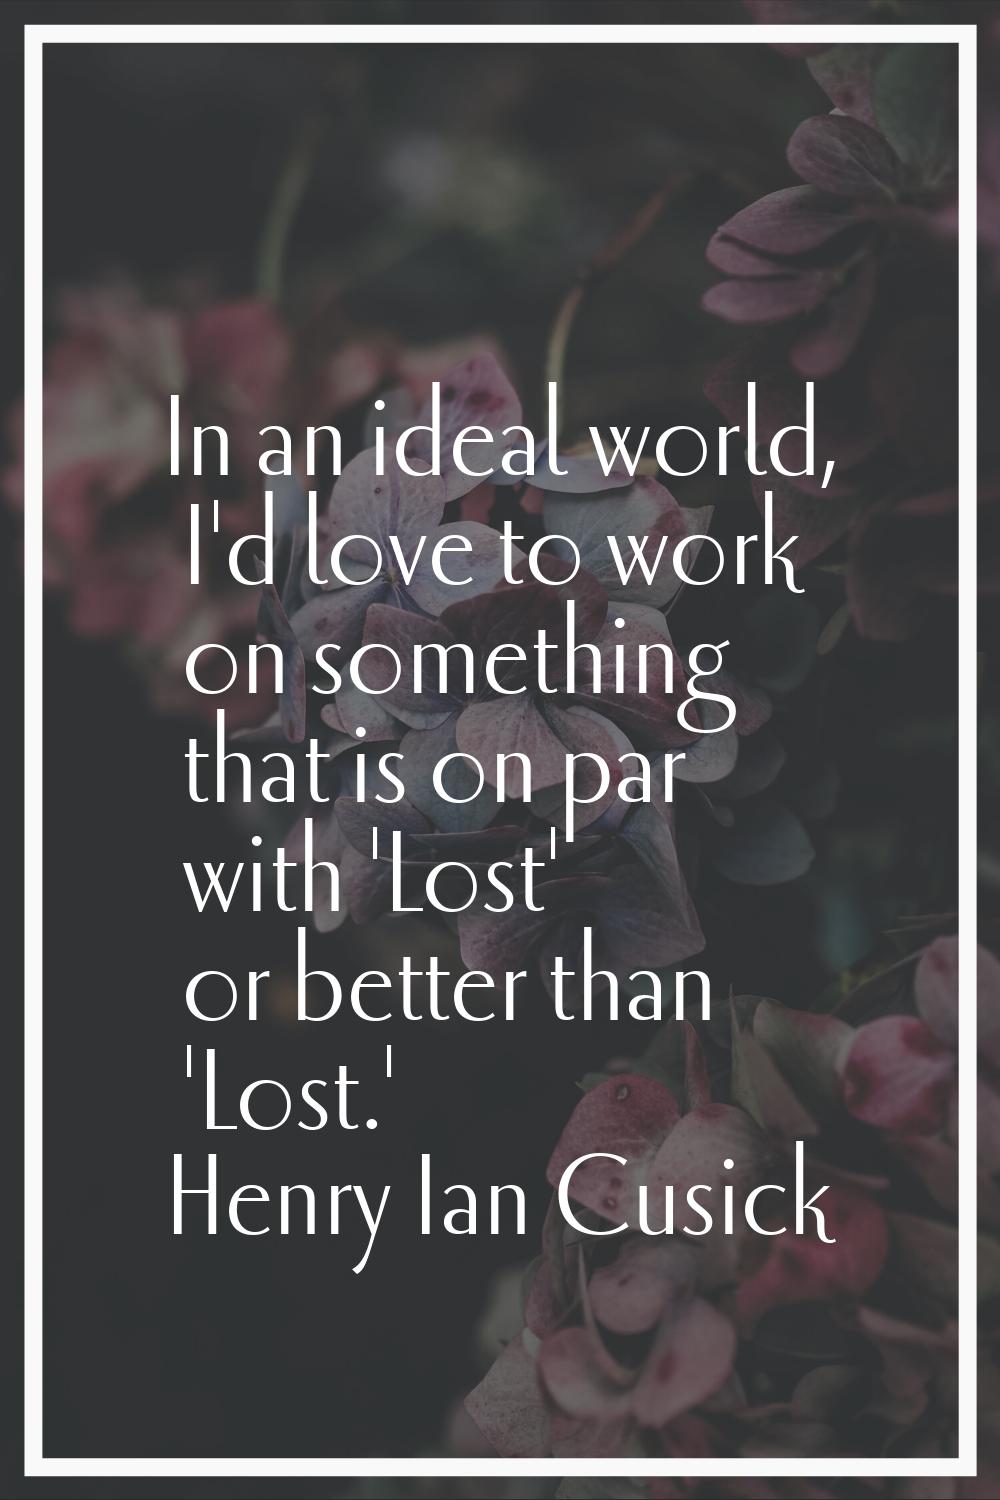 In an ideal world, I'd love to work on something that is on par with 'Lost' or better than 'Lost.'